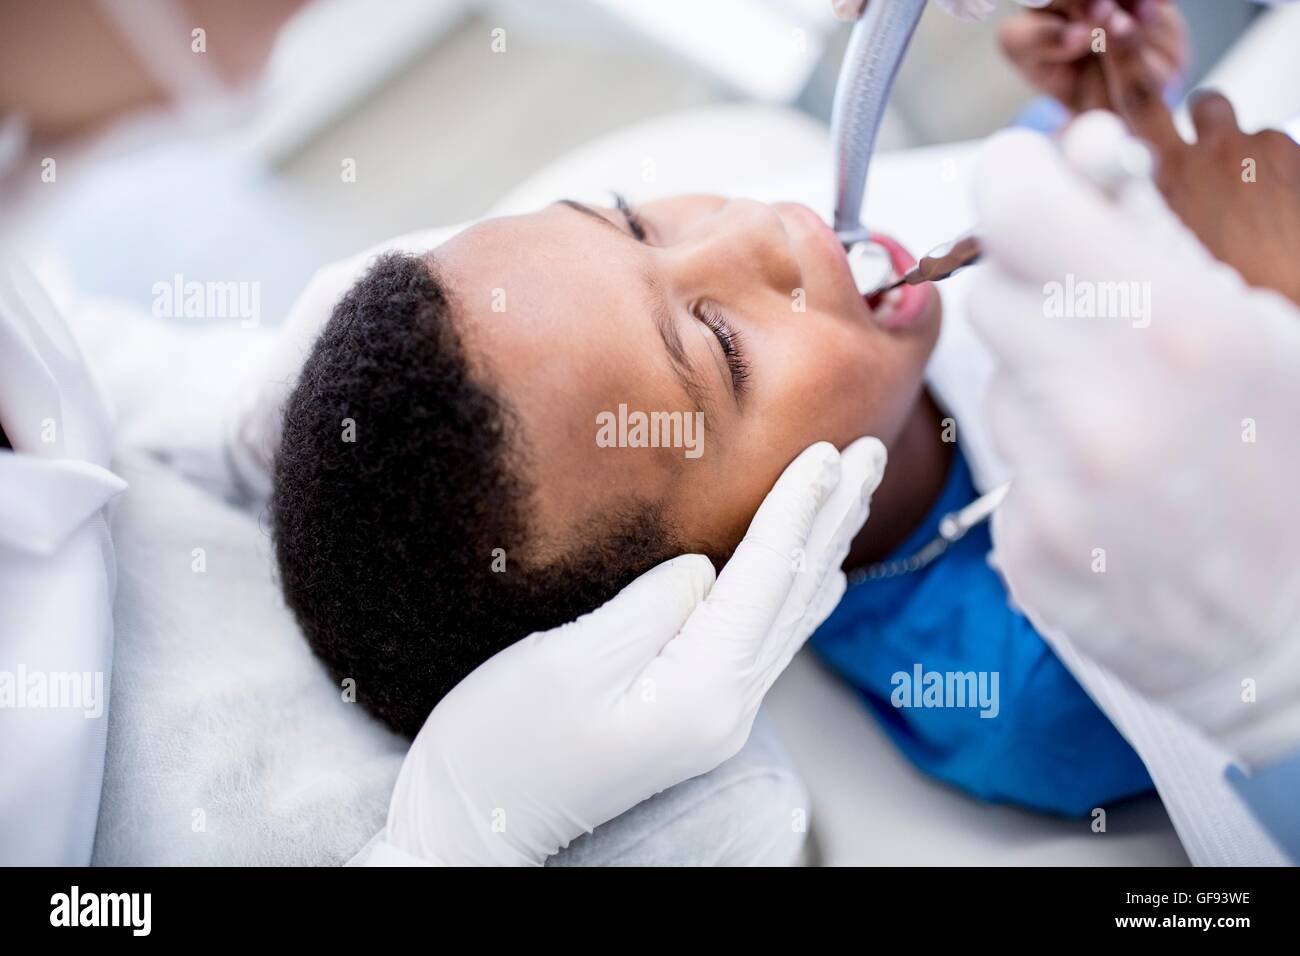 MODEL RELEASED. Dentist drilling boy's teeth in clinic. Stock Photo